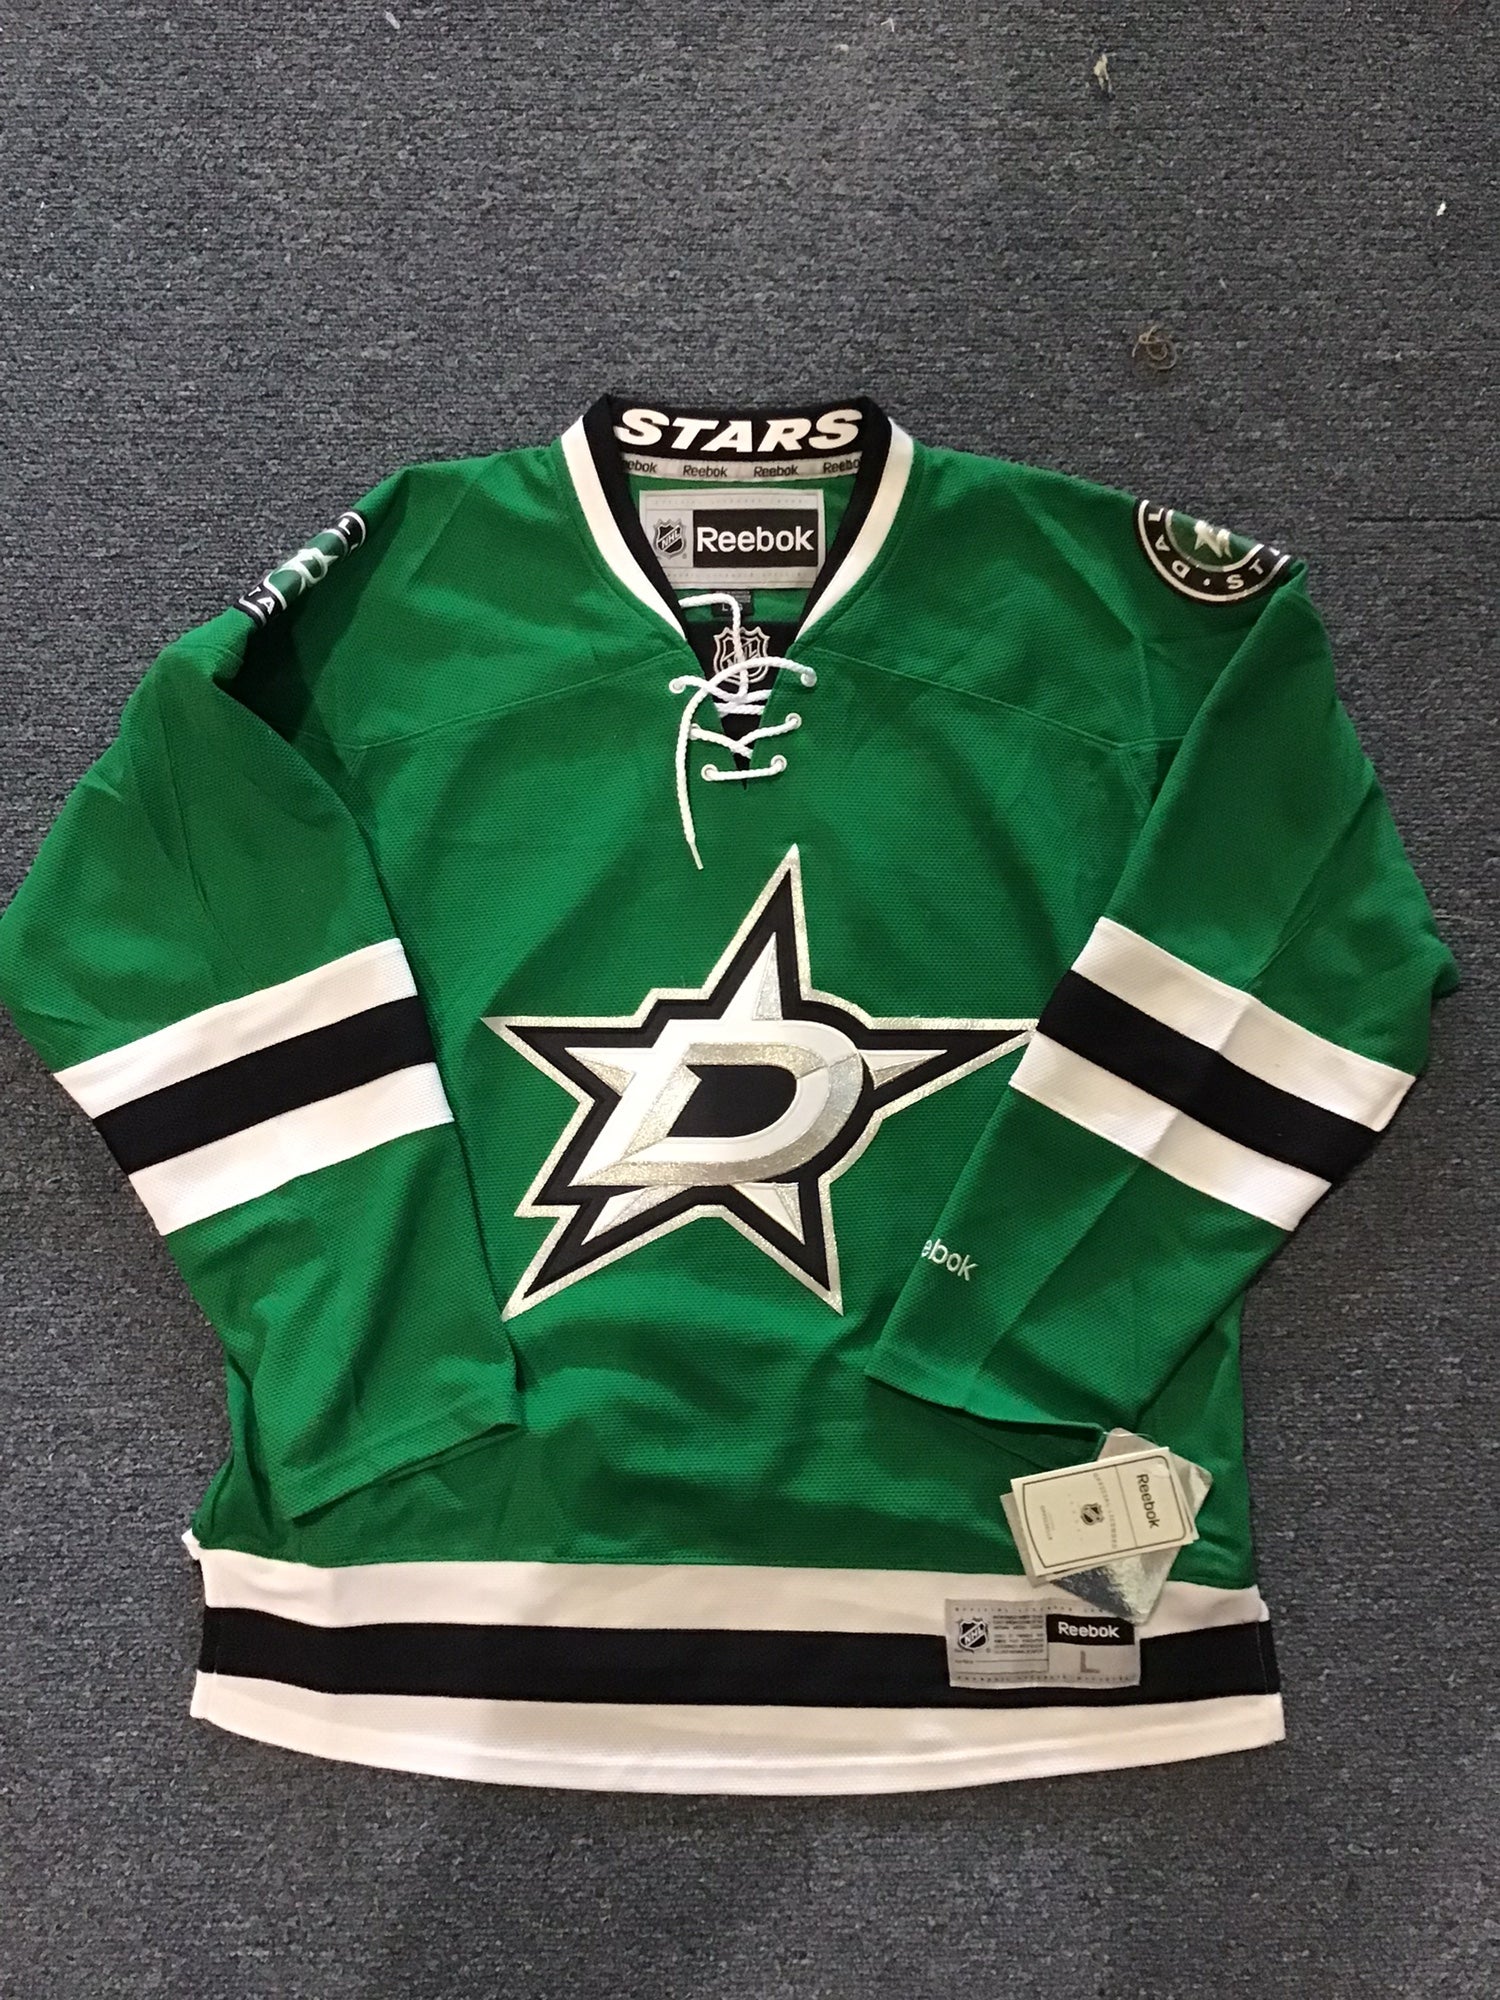 Autographed CCM Cote Dallas Stars Stanley Cup Hockey Jersey 2NHL